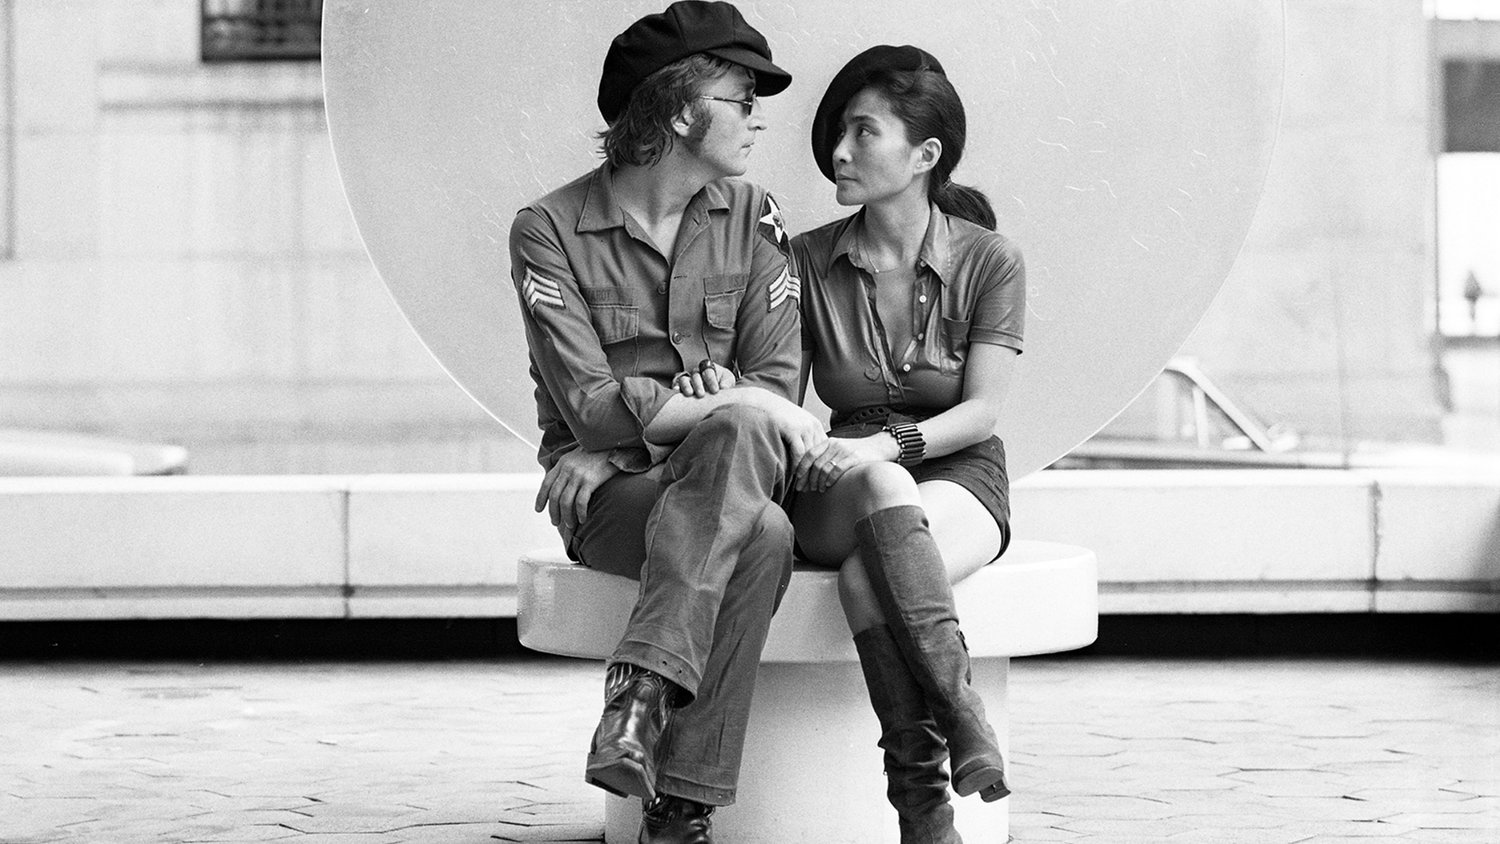 Universal Picture To Develop A John Lennon And Yoko Ono Film With Director Jean Marc Vallée